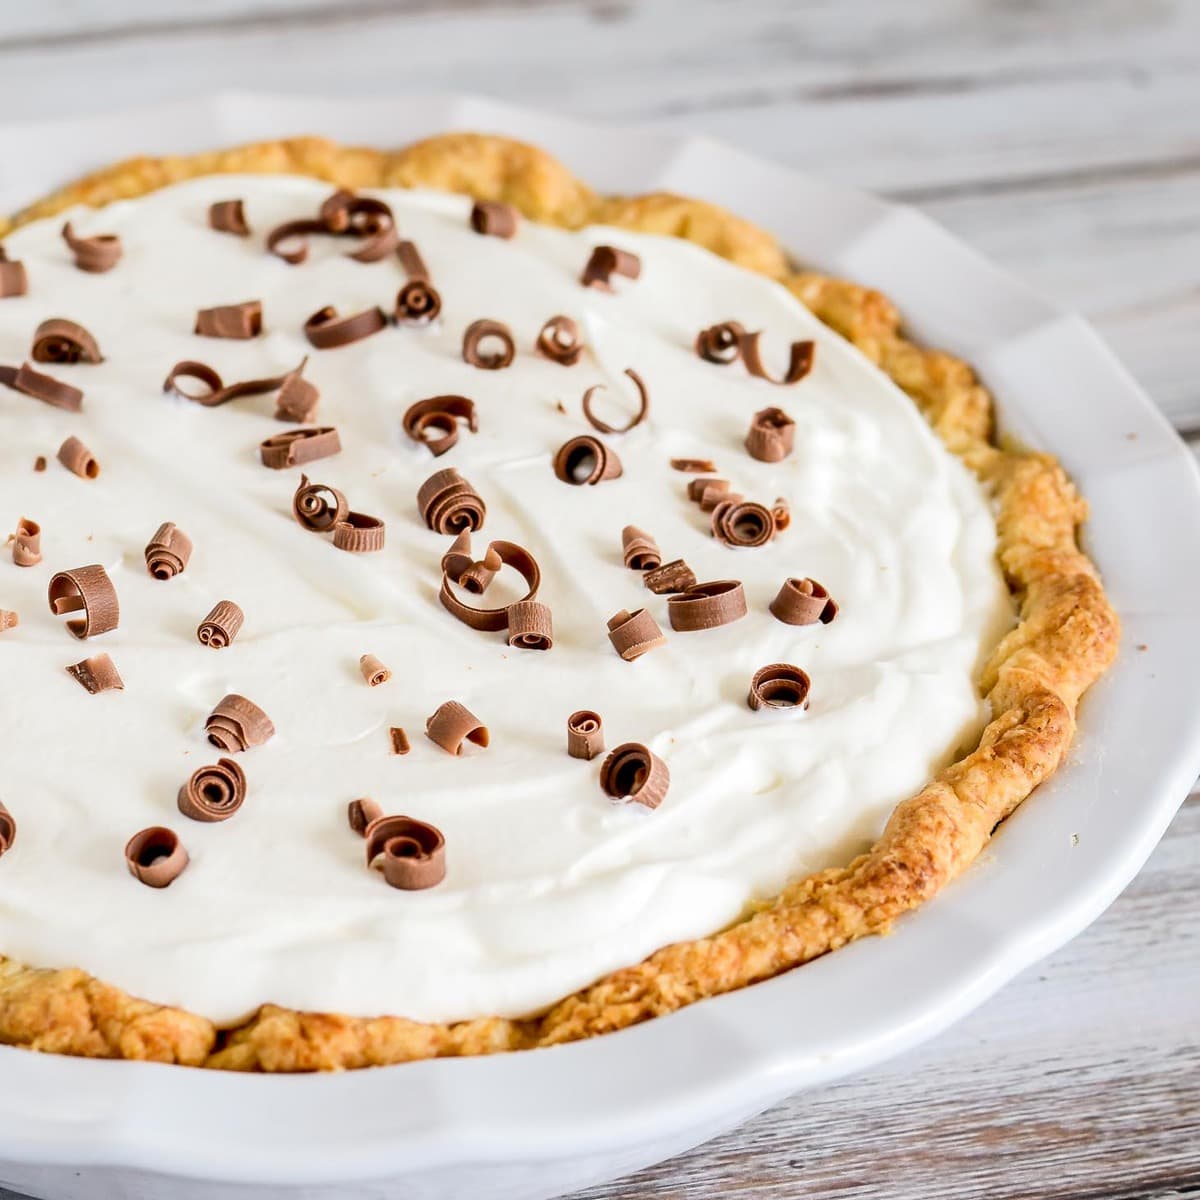 Chocolate Cream Pie topped with whipped cream and chocolate curls in a white pie dish